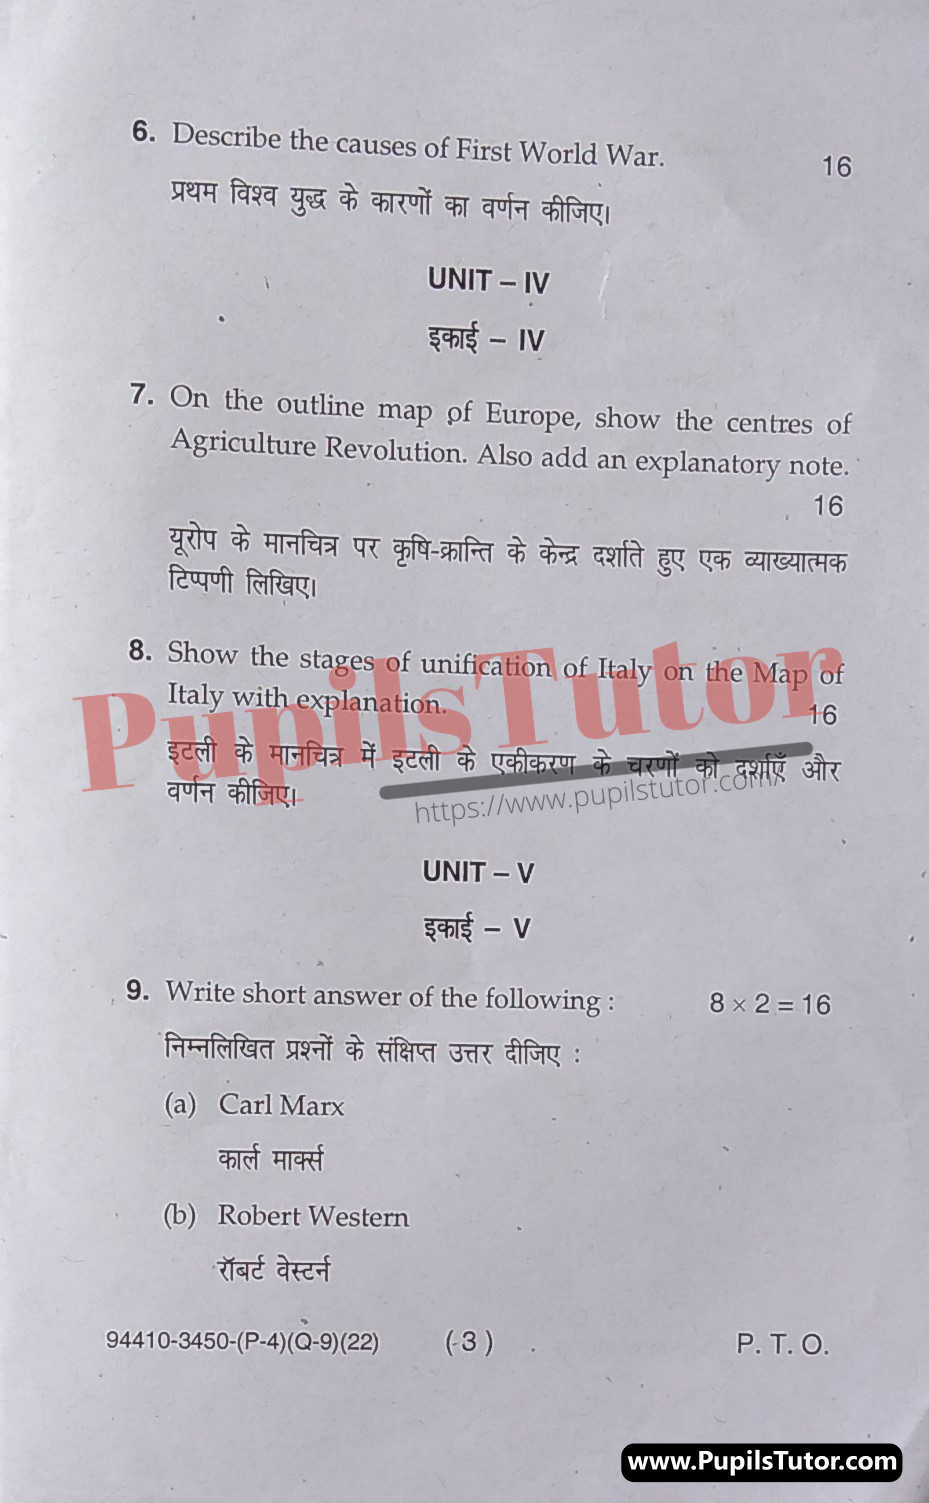 Free Download PDF Of M.D. University B.A. Sixth Semester Latest Question Paper For History (Modern World) Subject (Page 3) - https://www.pupilstutor.com